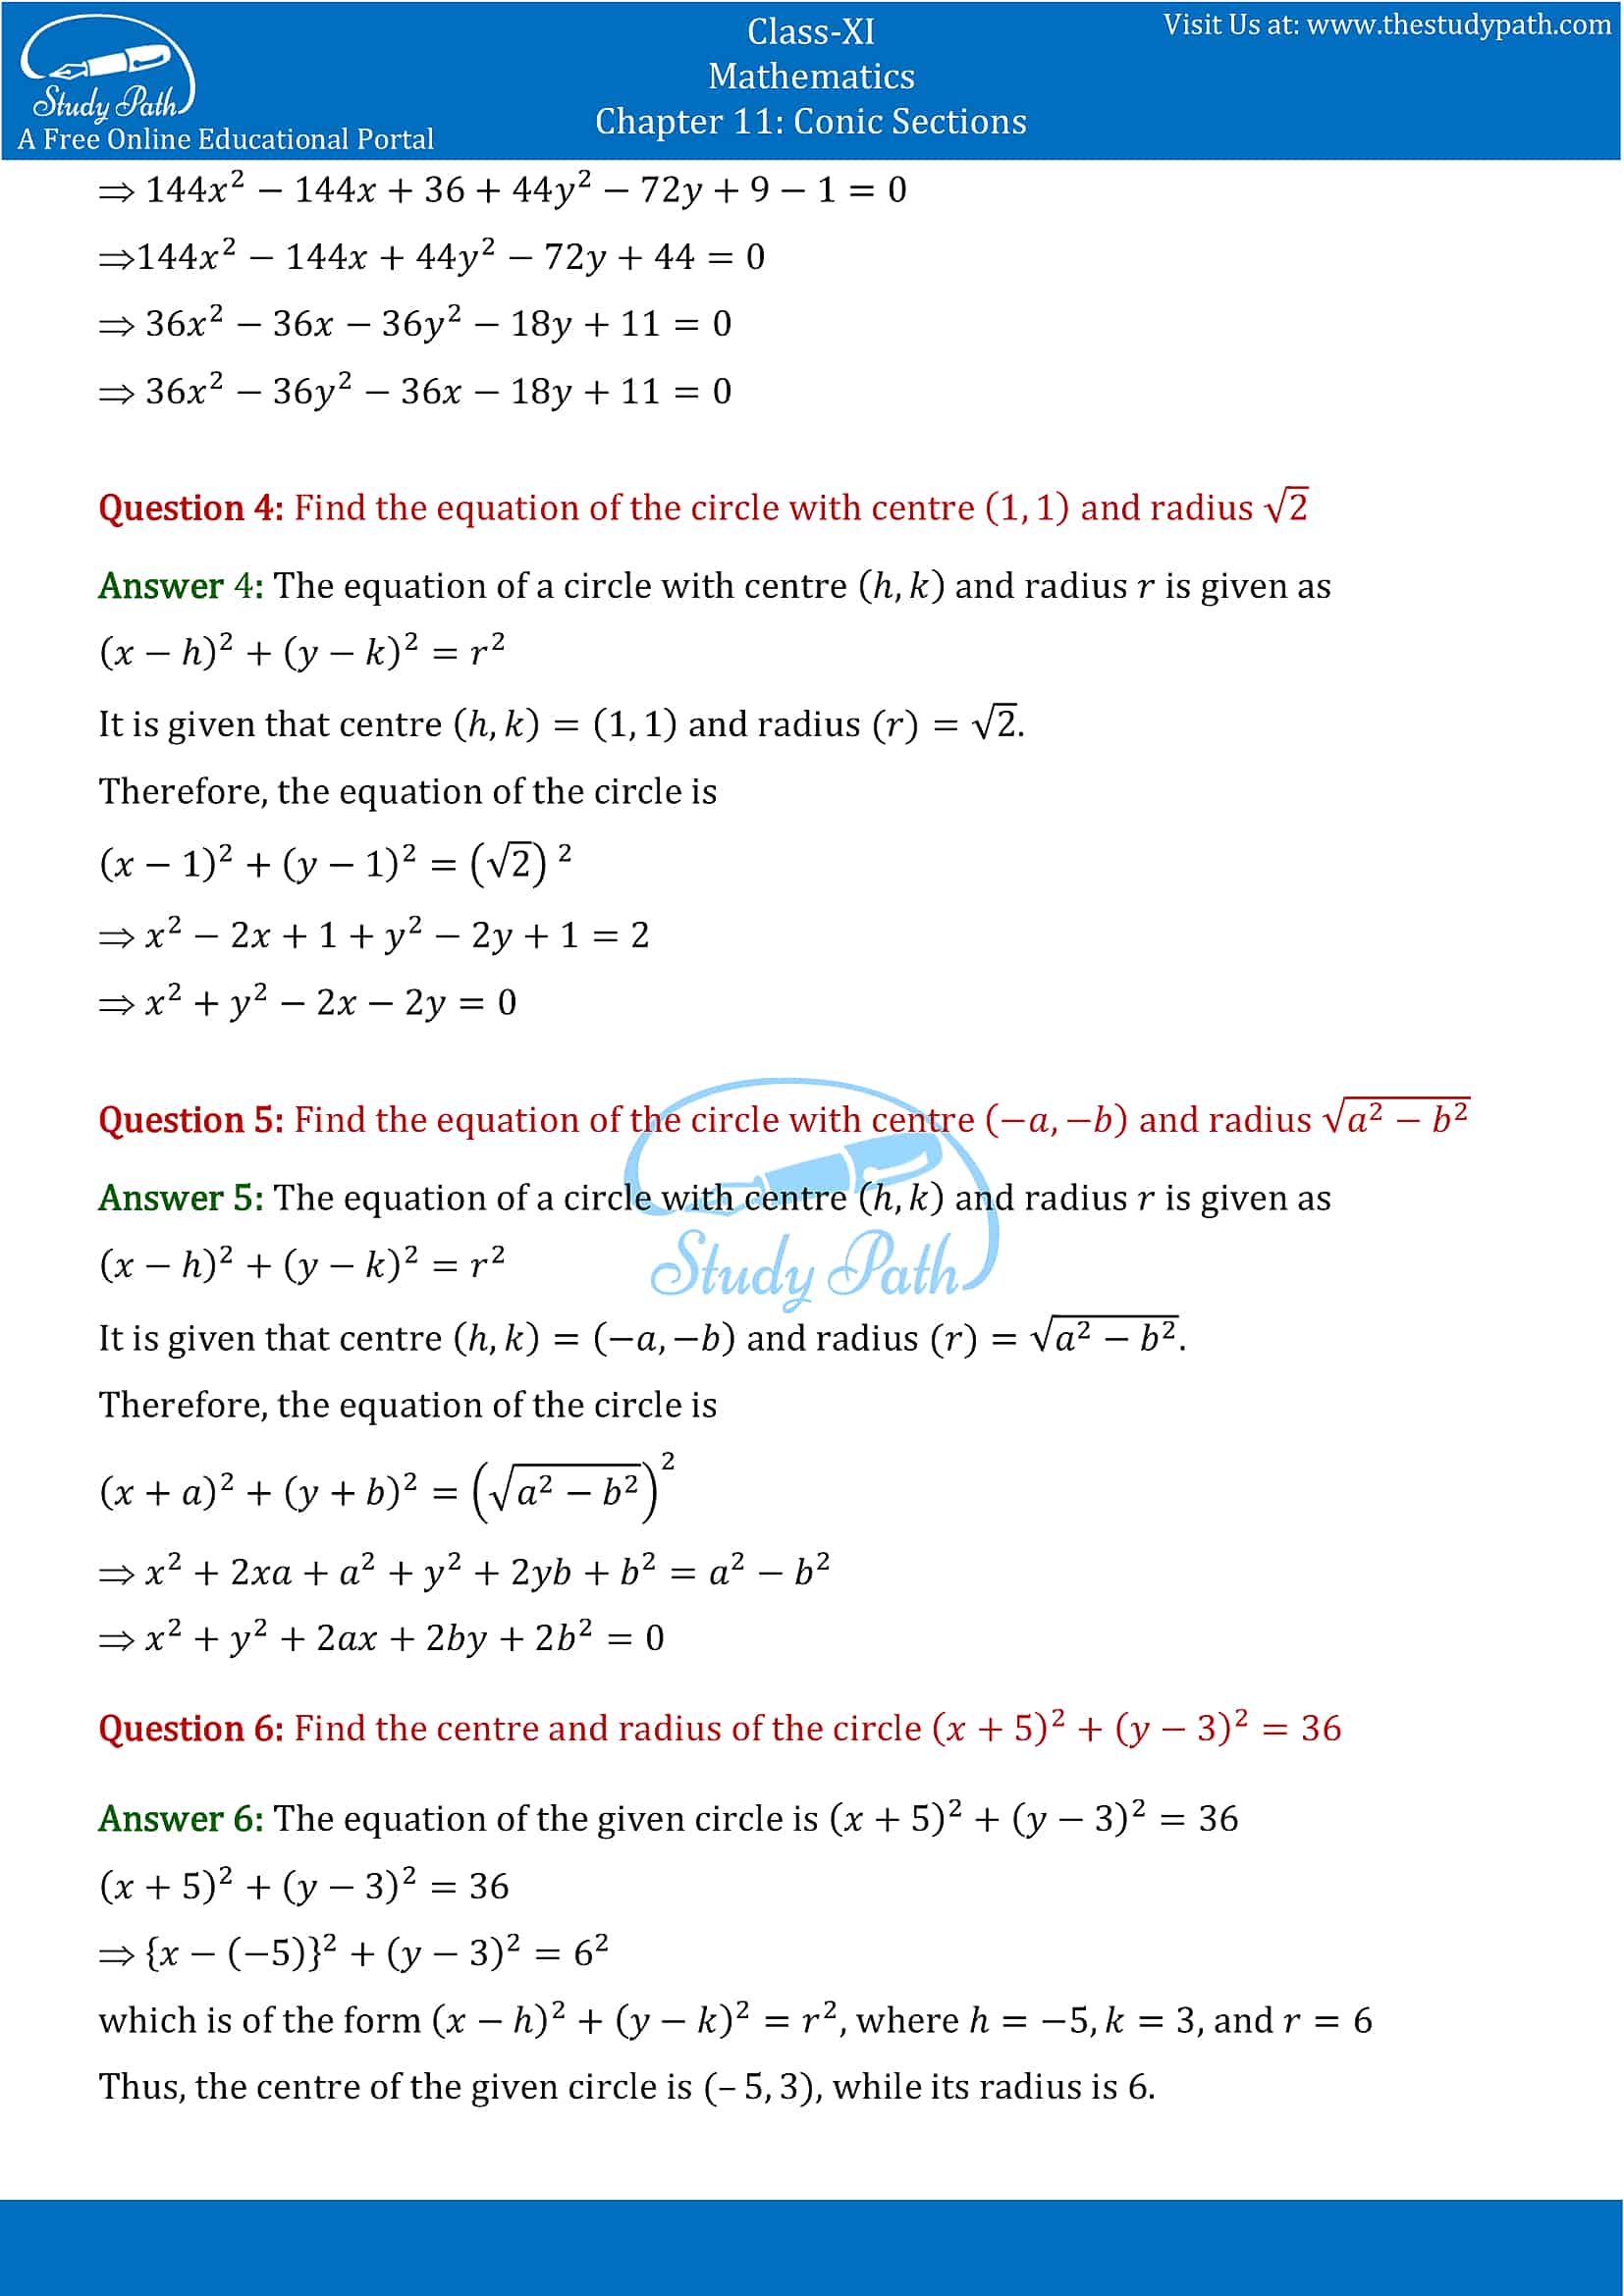 NCERT Solutions for Class 11 Maths chapter 11 Conic Section Exercise 11.1 Part-2